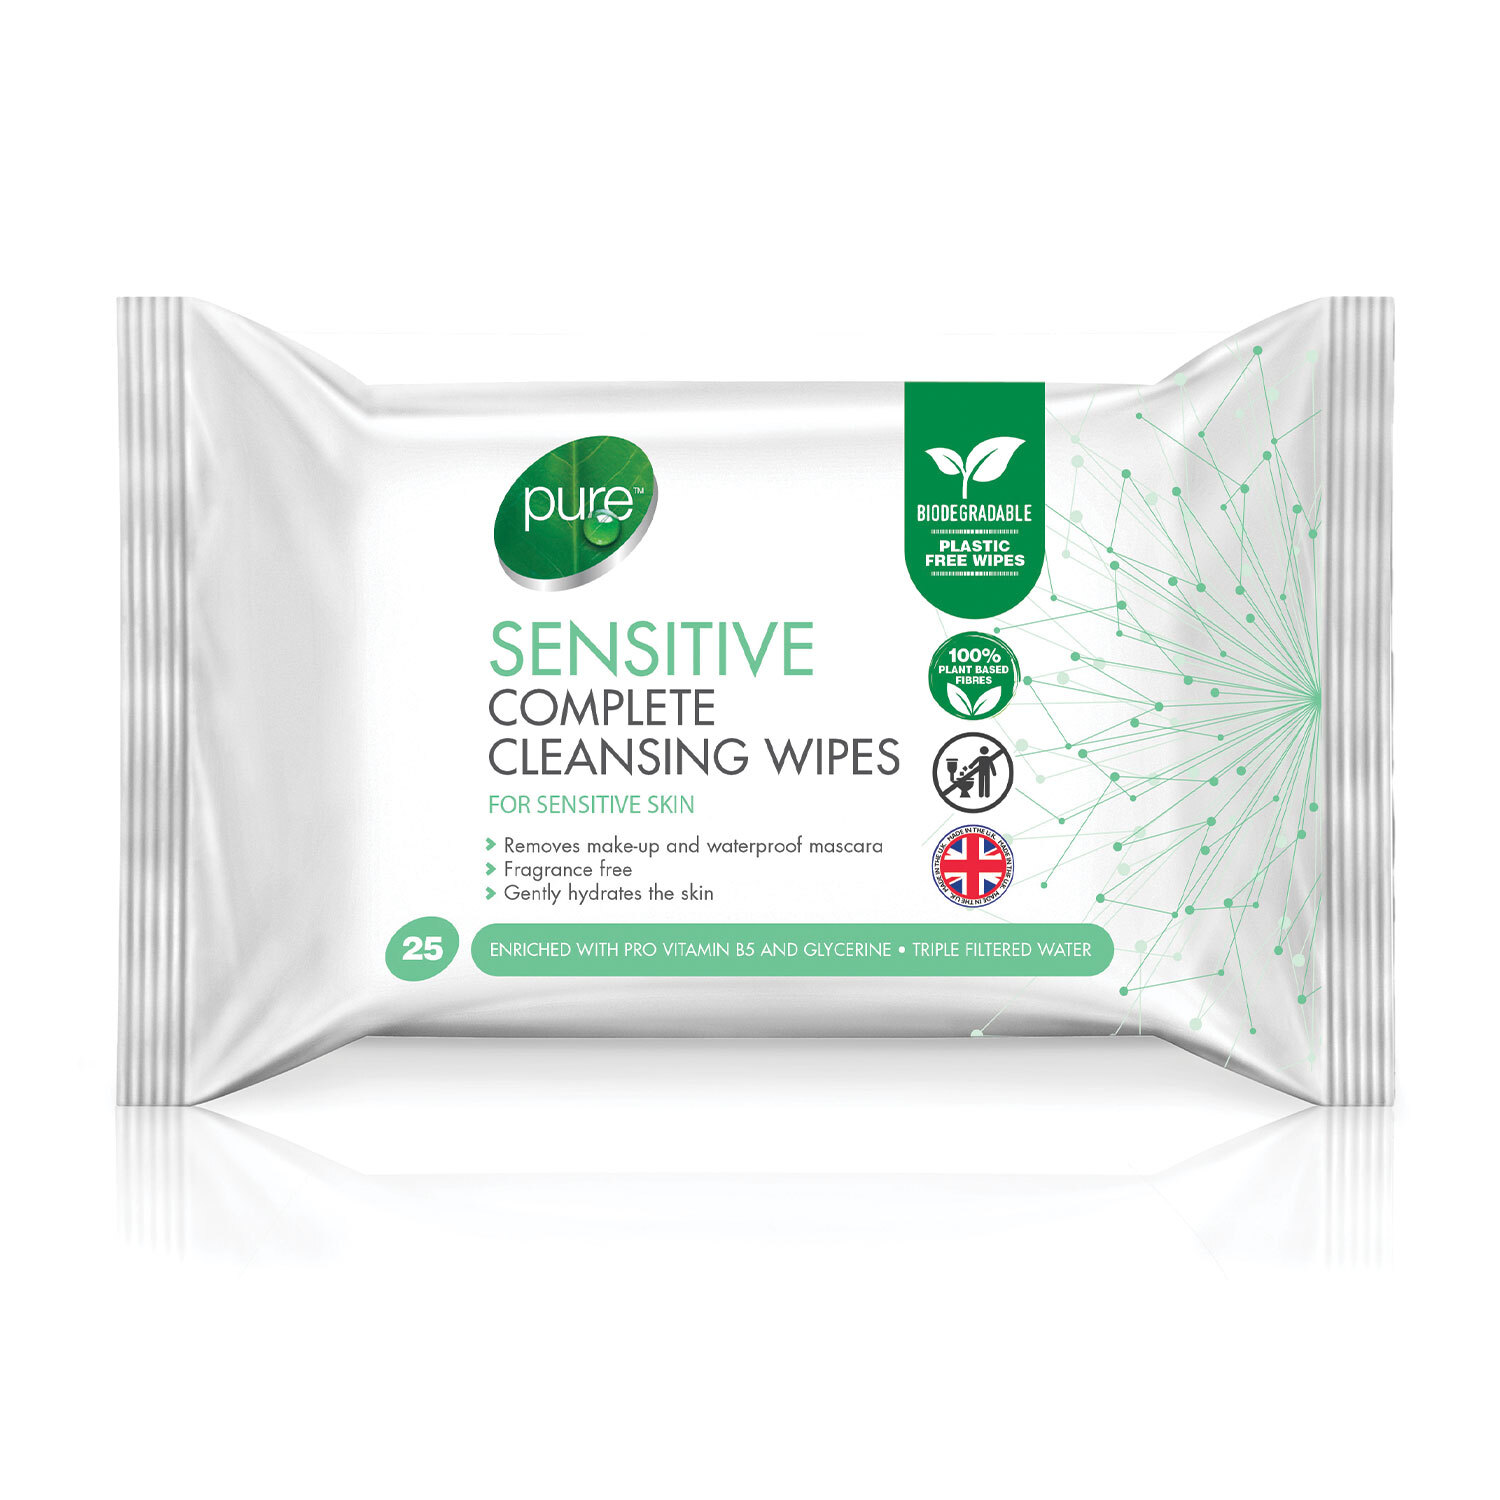 Pure Sensitive Complete Cleansing Wipes Image